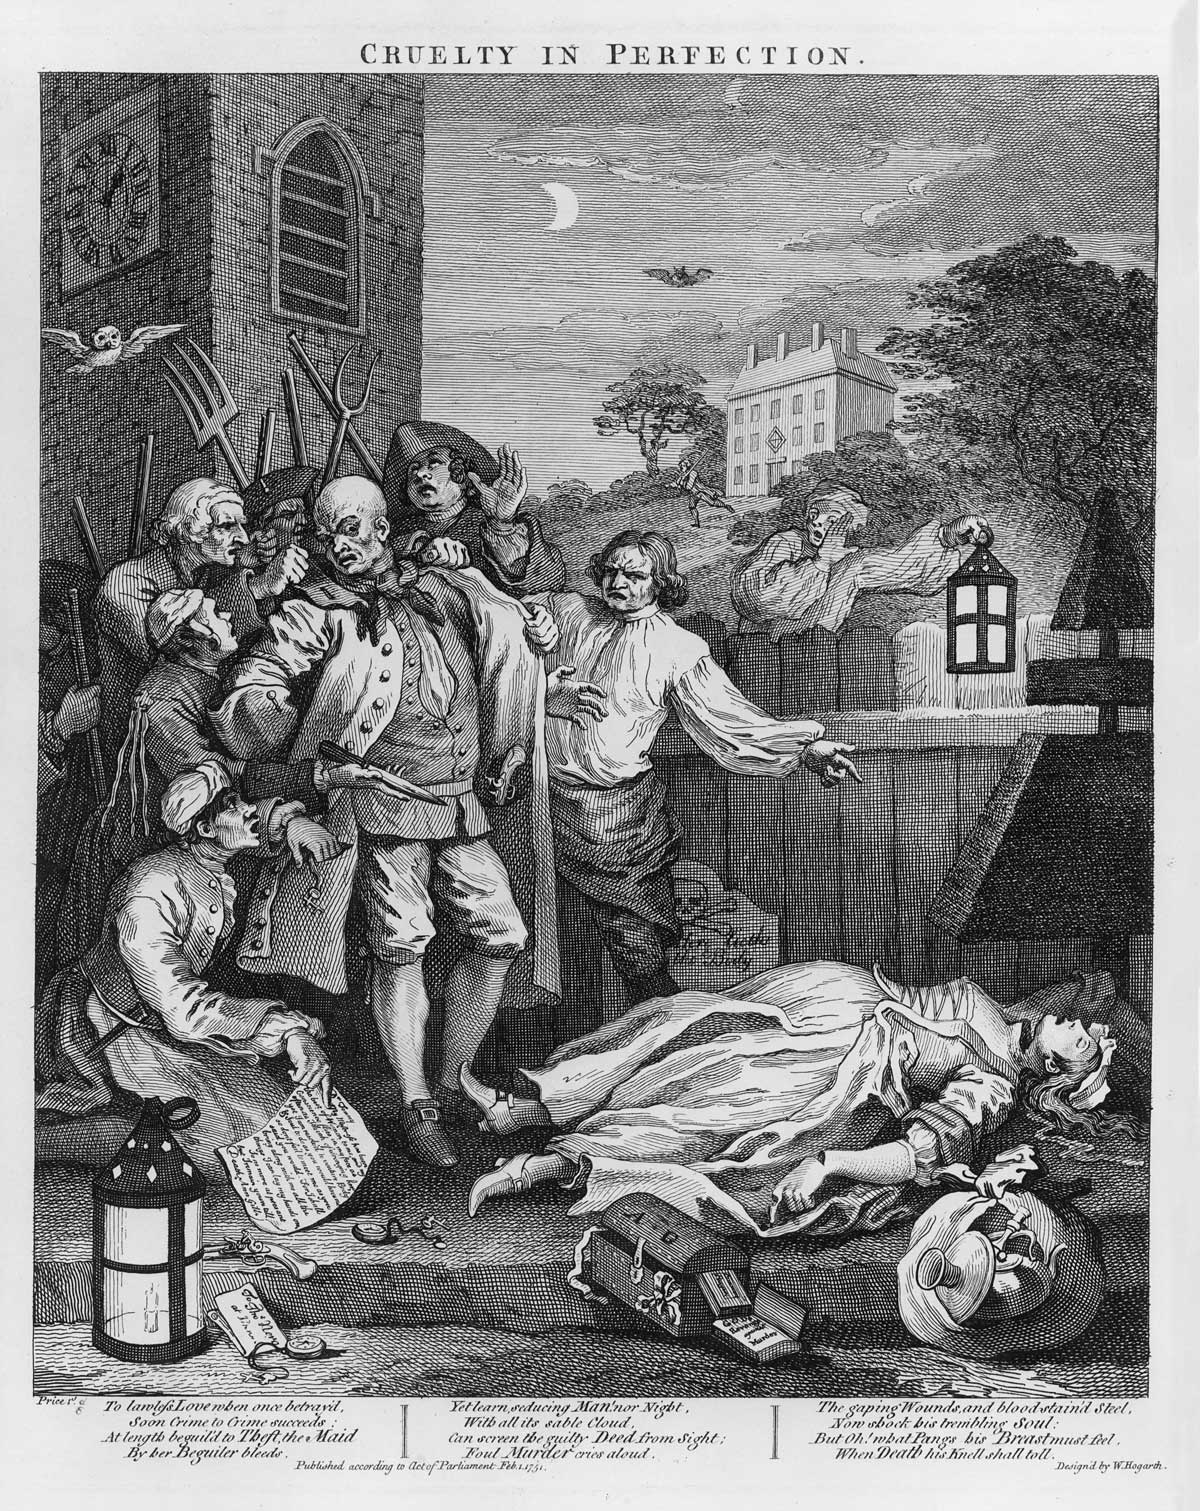 The terrible conclusion: Cruelty in Perfection (third stage of cruelty), by William Hogarth, engraving, 1751.